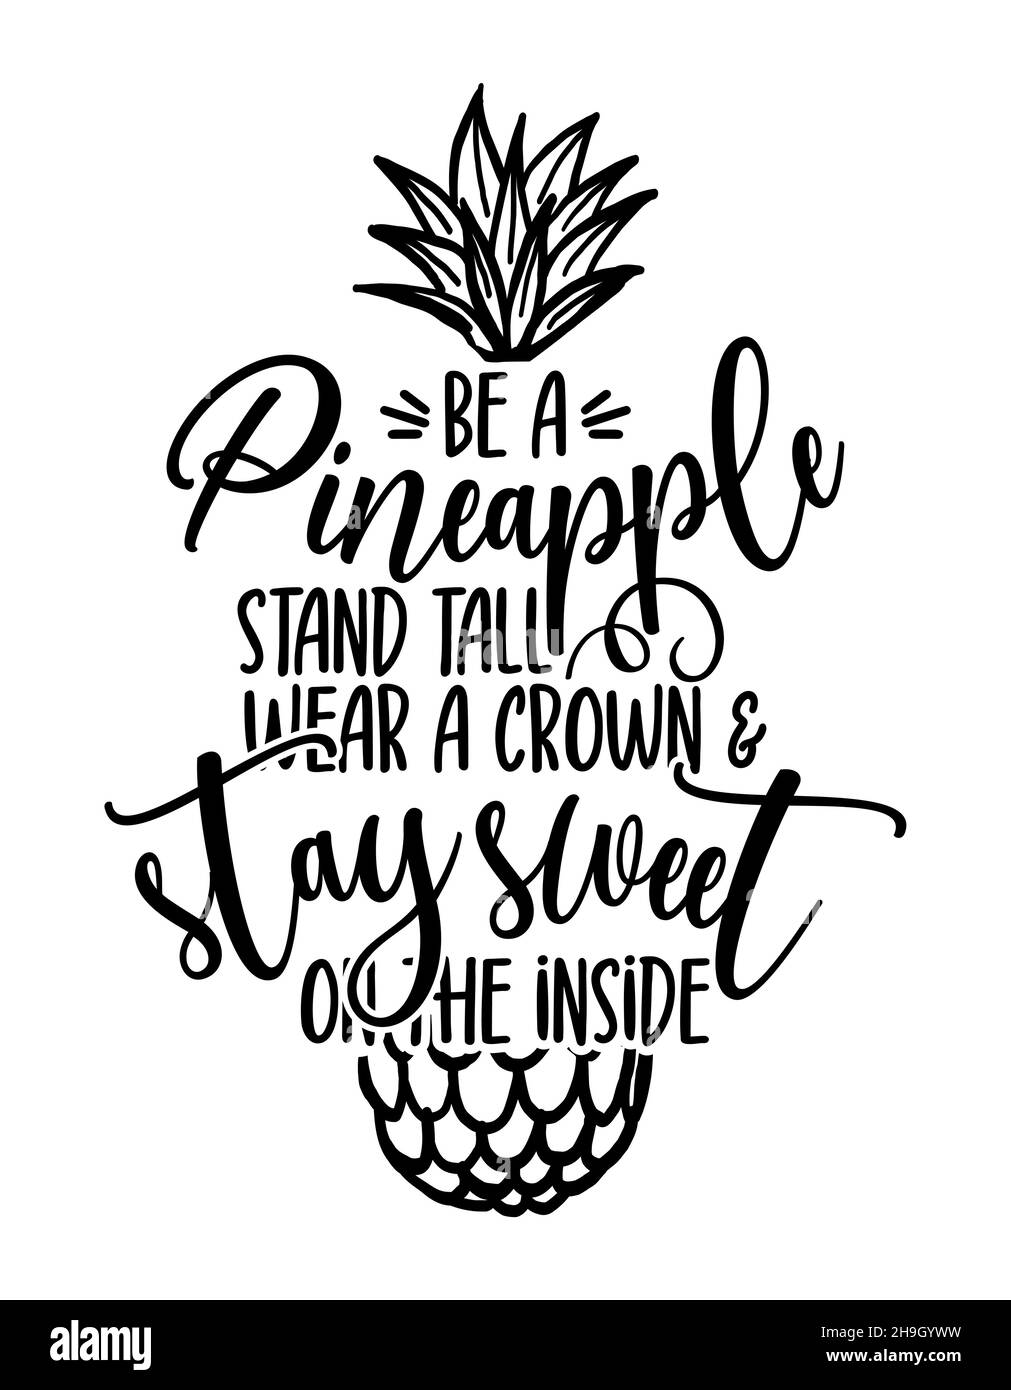 Be a Pineapple, stand tall, wear a crown and stay sweet on the inside - Vector illustration of hand drawn pineapple and phrase. Stock Vector